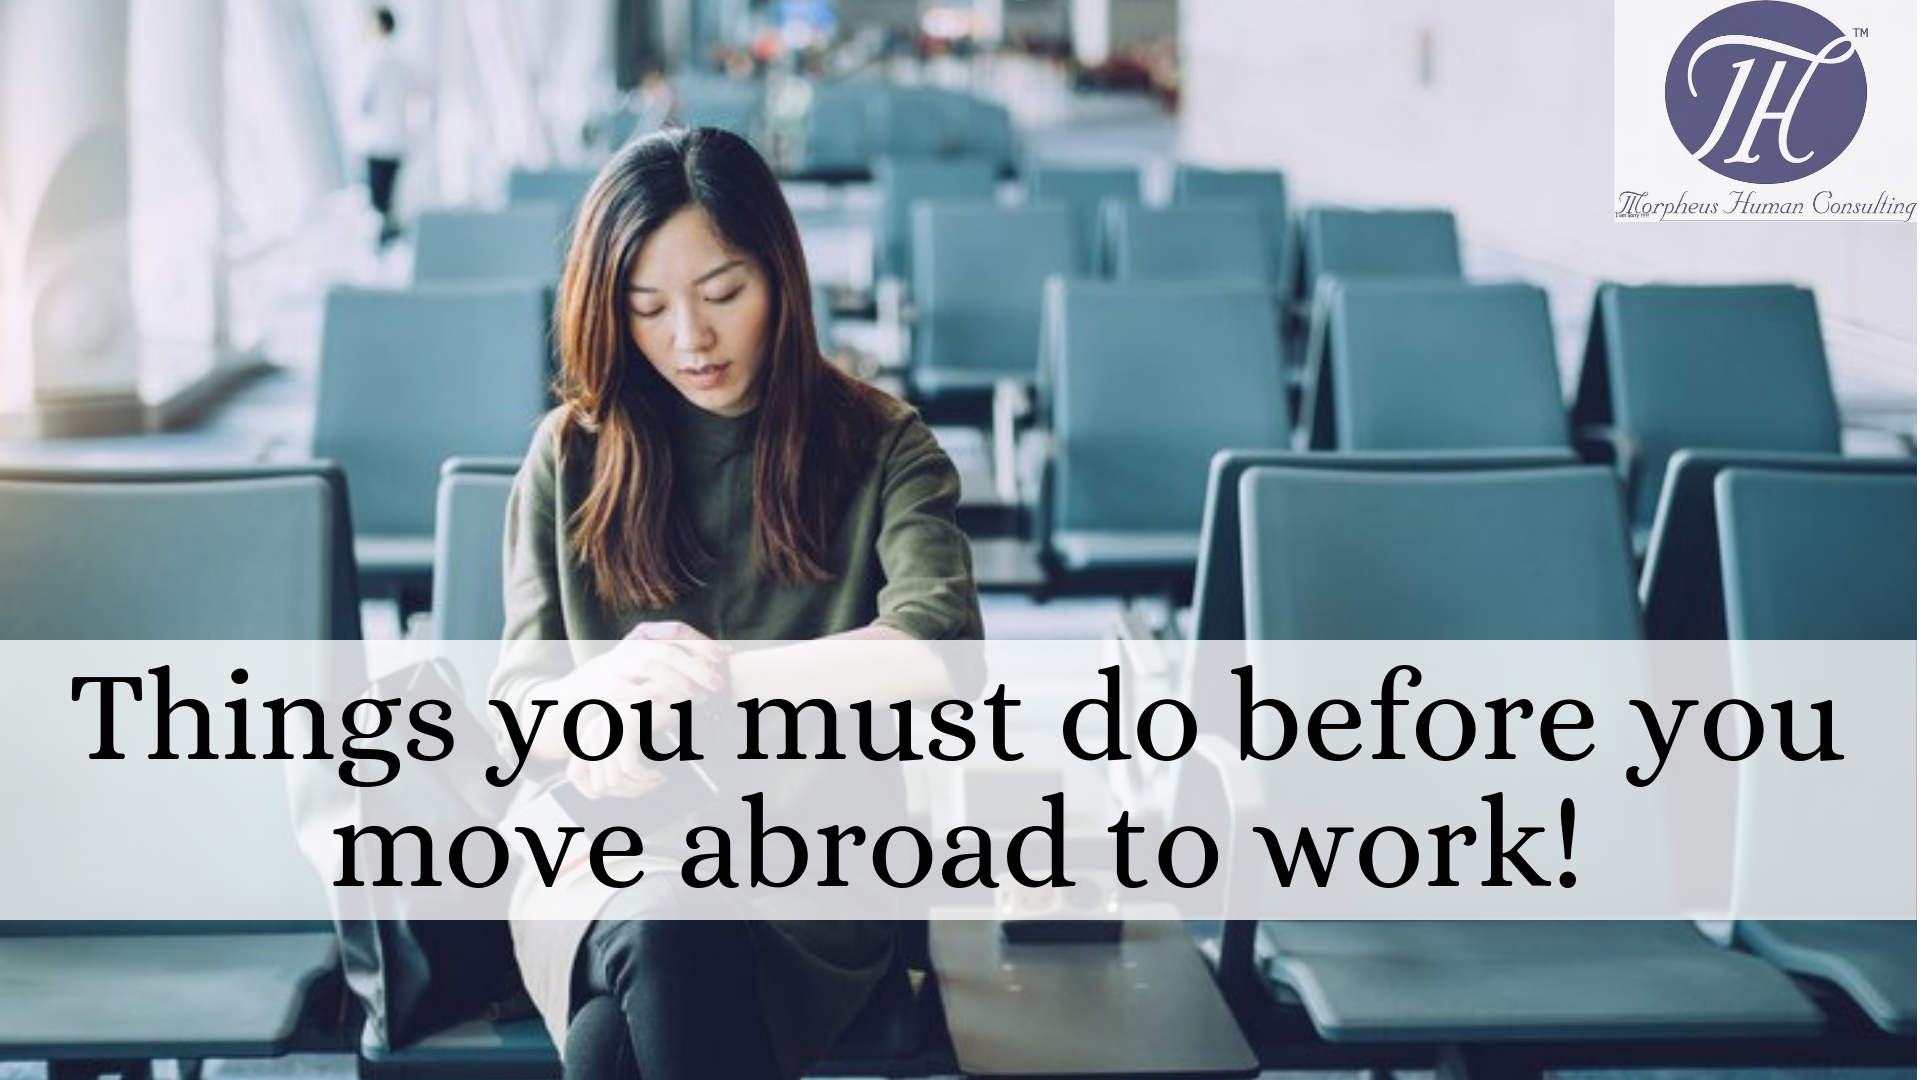  Things you must do before you move abroad to work!